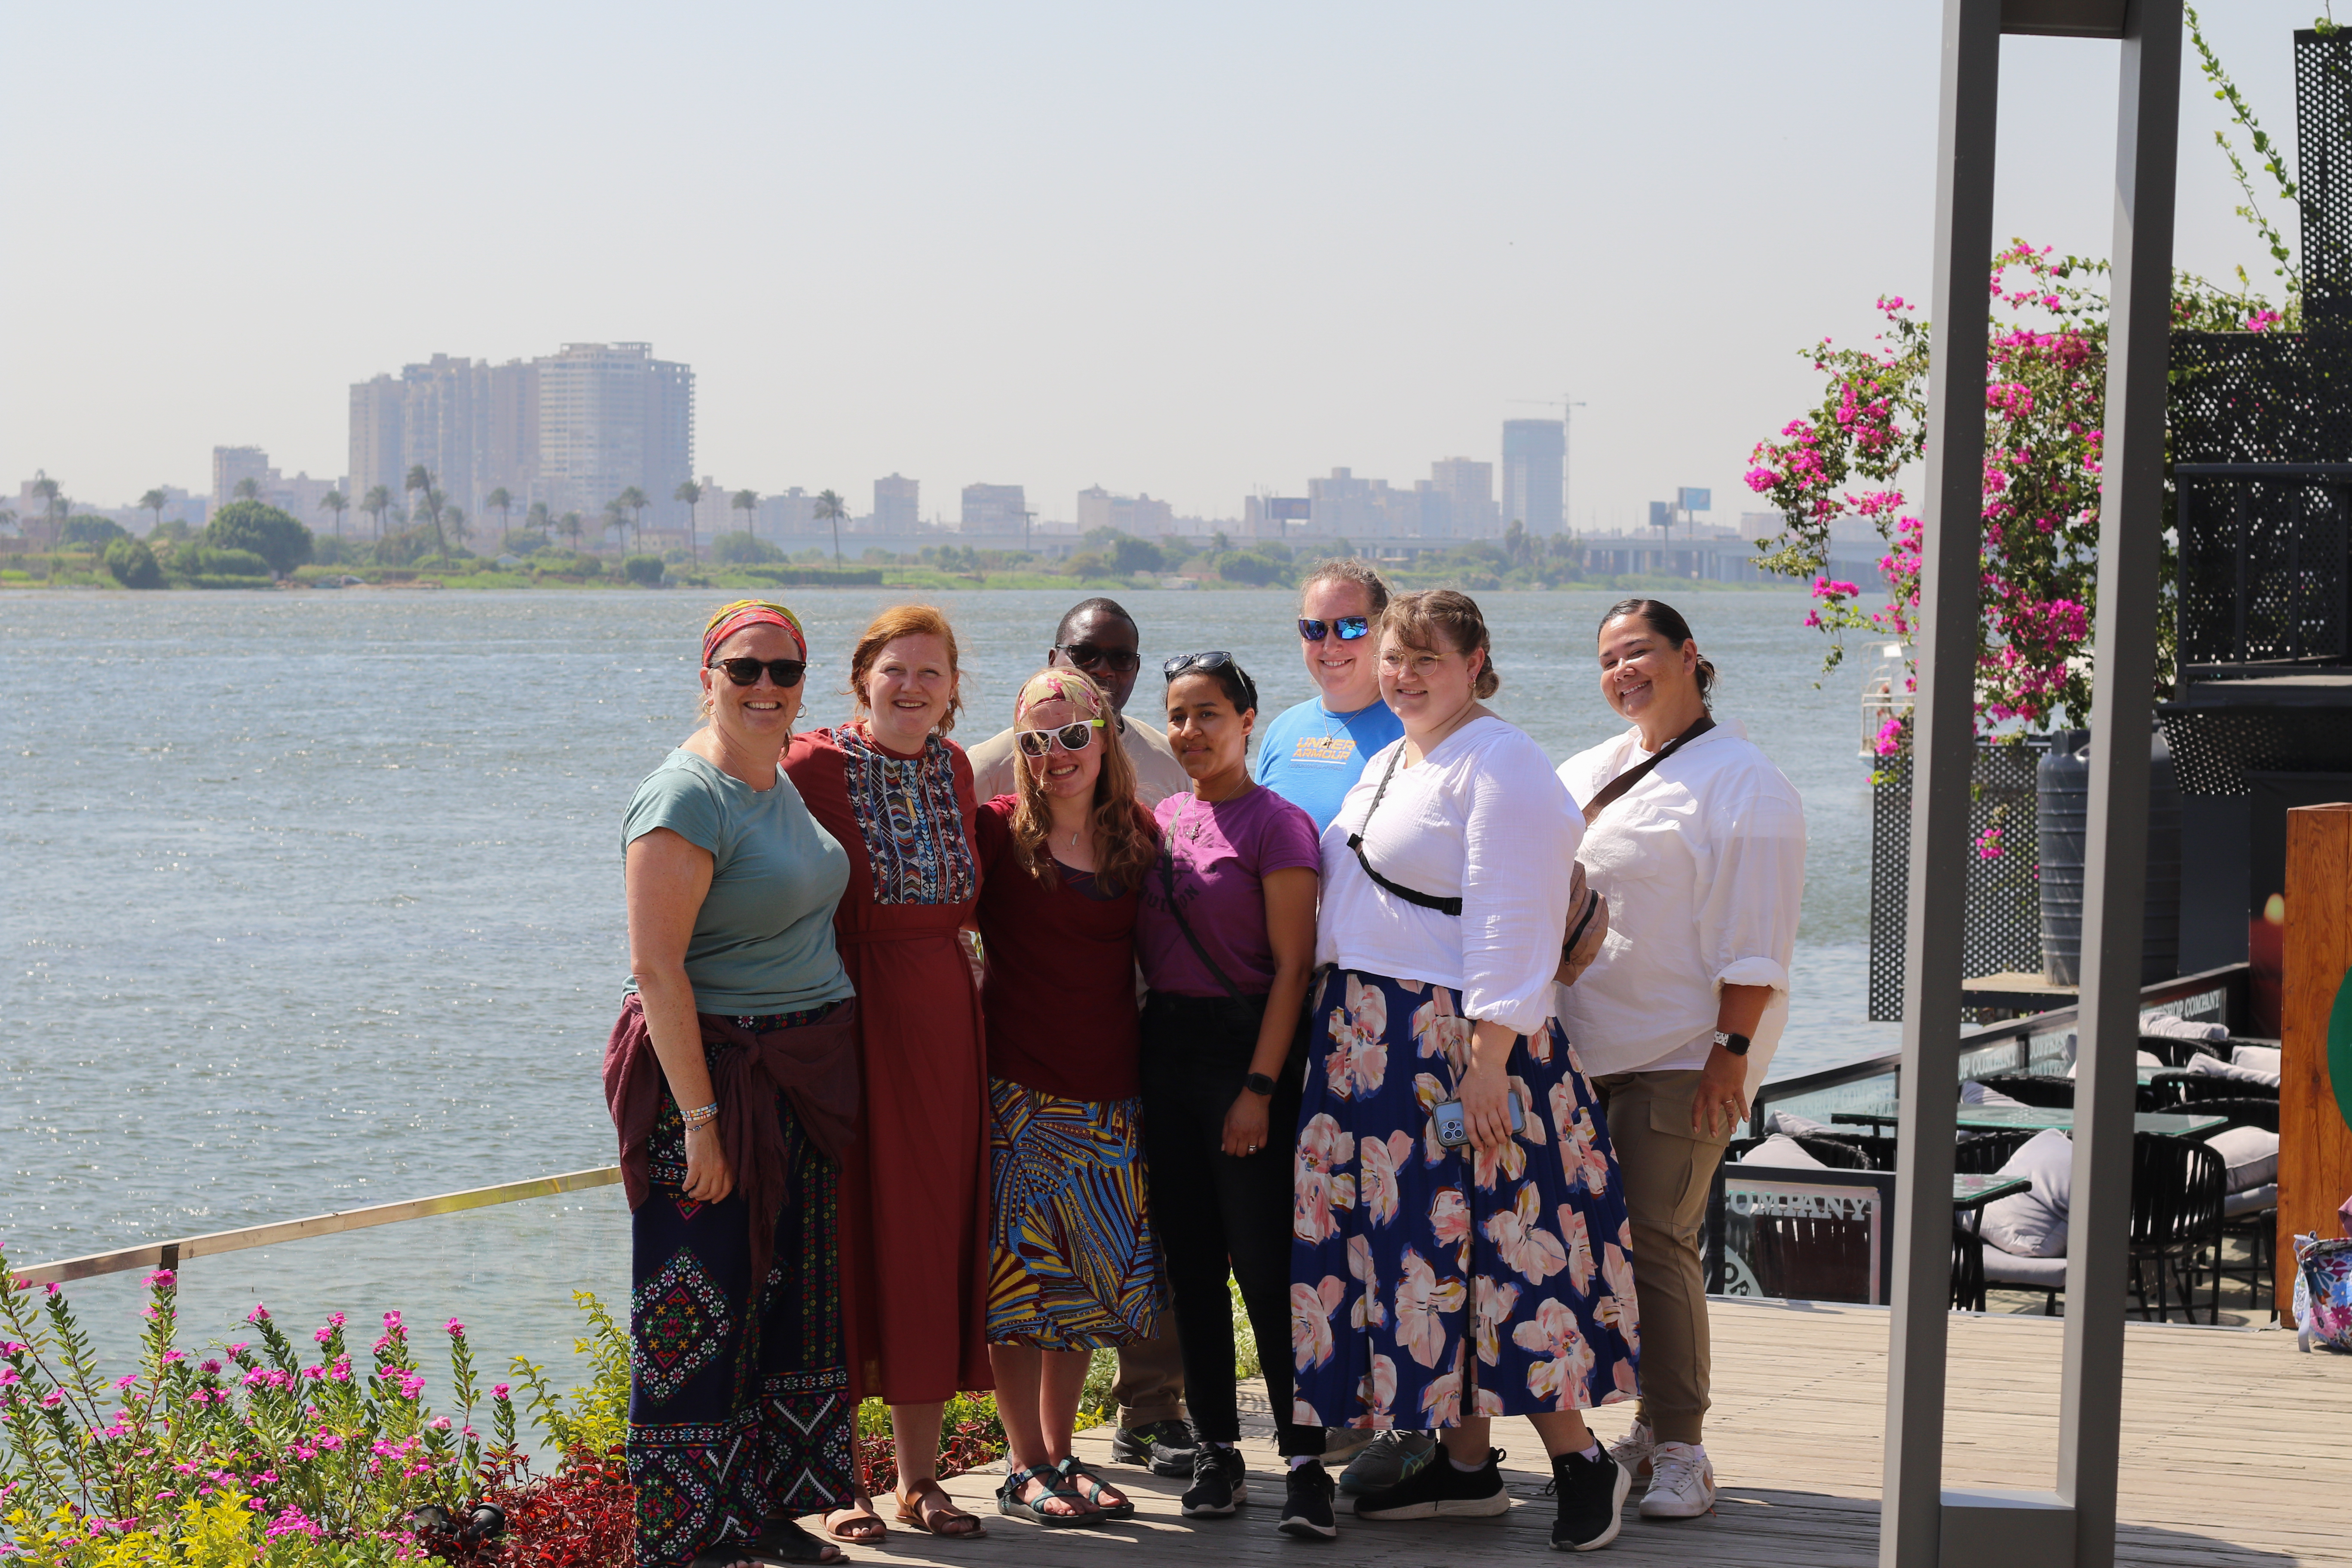 Eight people stand next to the Nile smiling